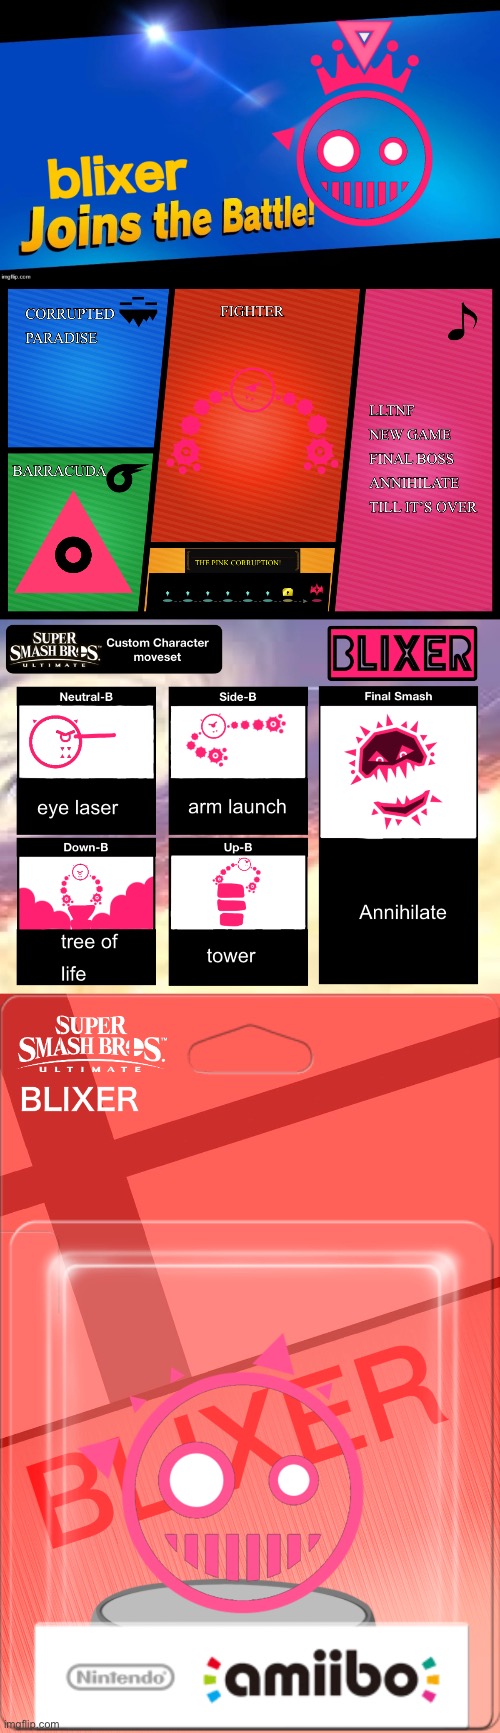 (Fighter meant to say blixer) 3rd time he joined the battle but with a moveset | made w/ Imgflip meme maker